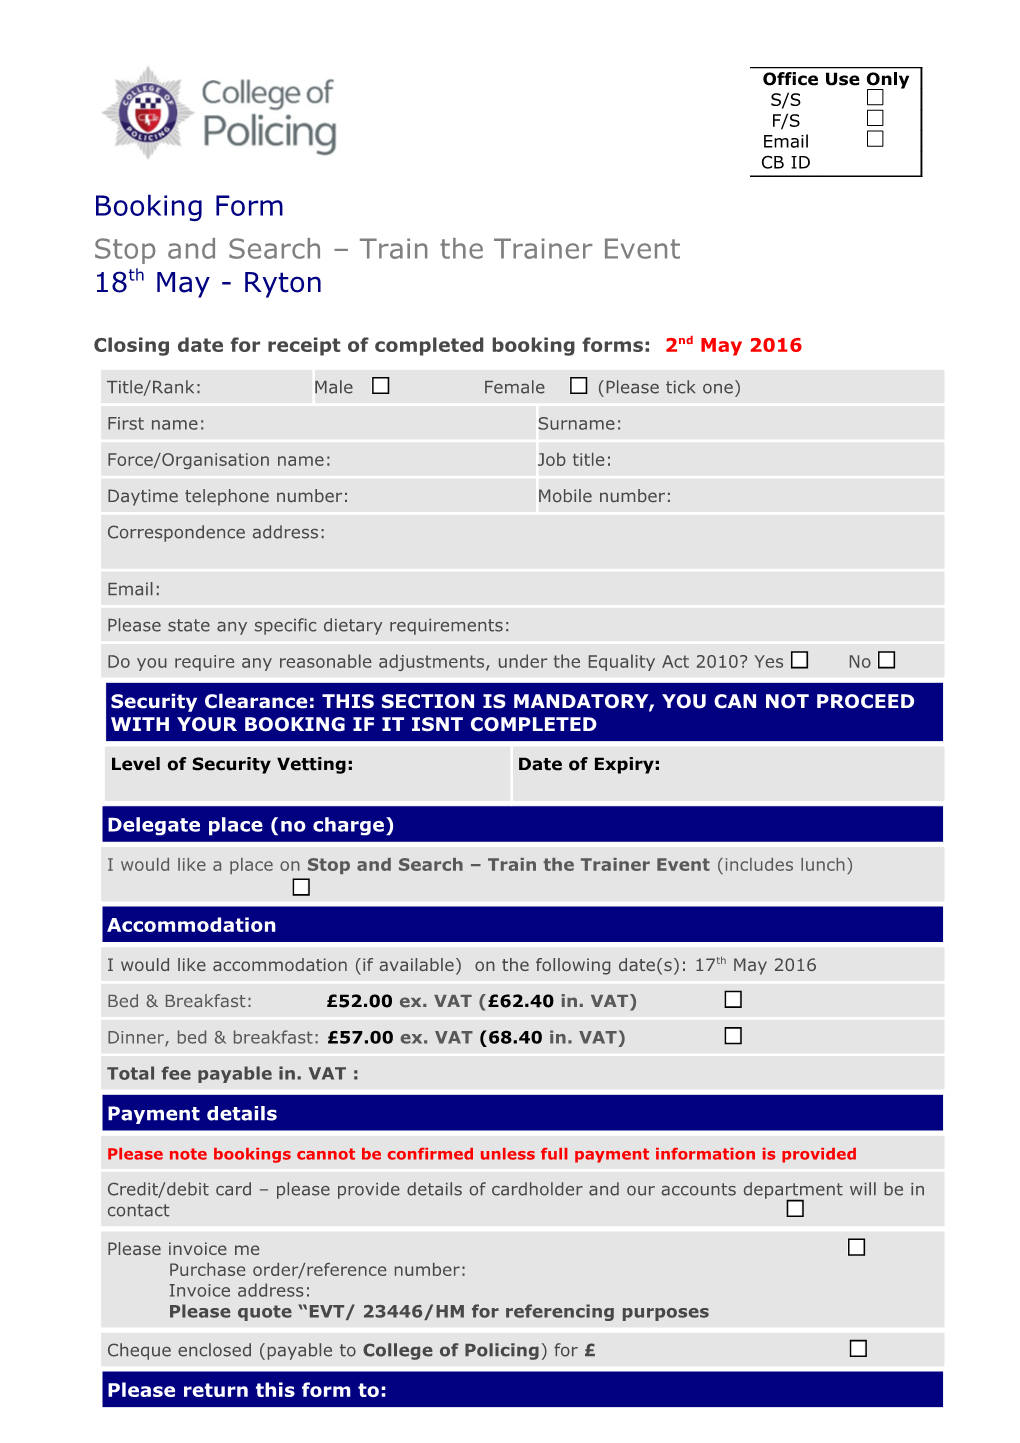 Train the Trainer Ryton Booking Form